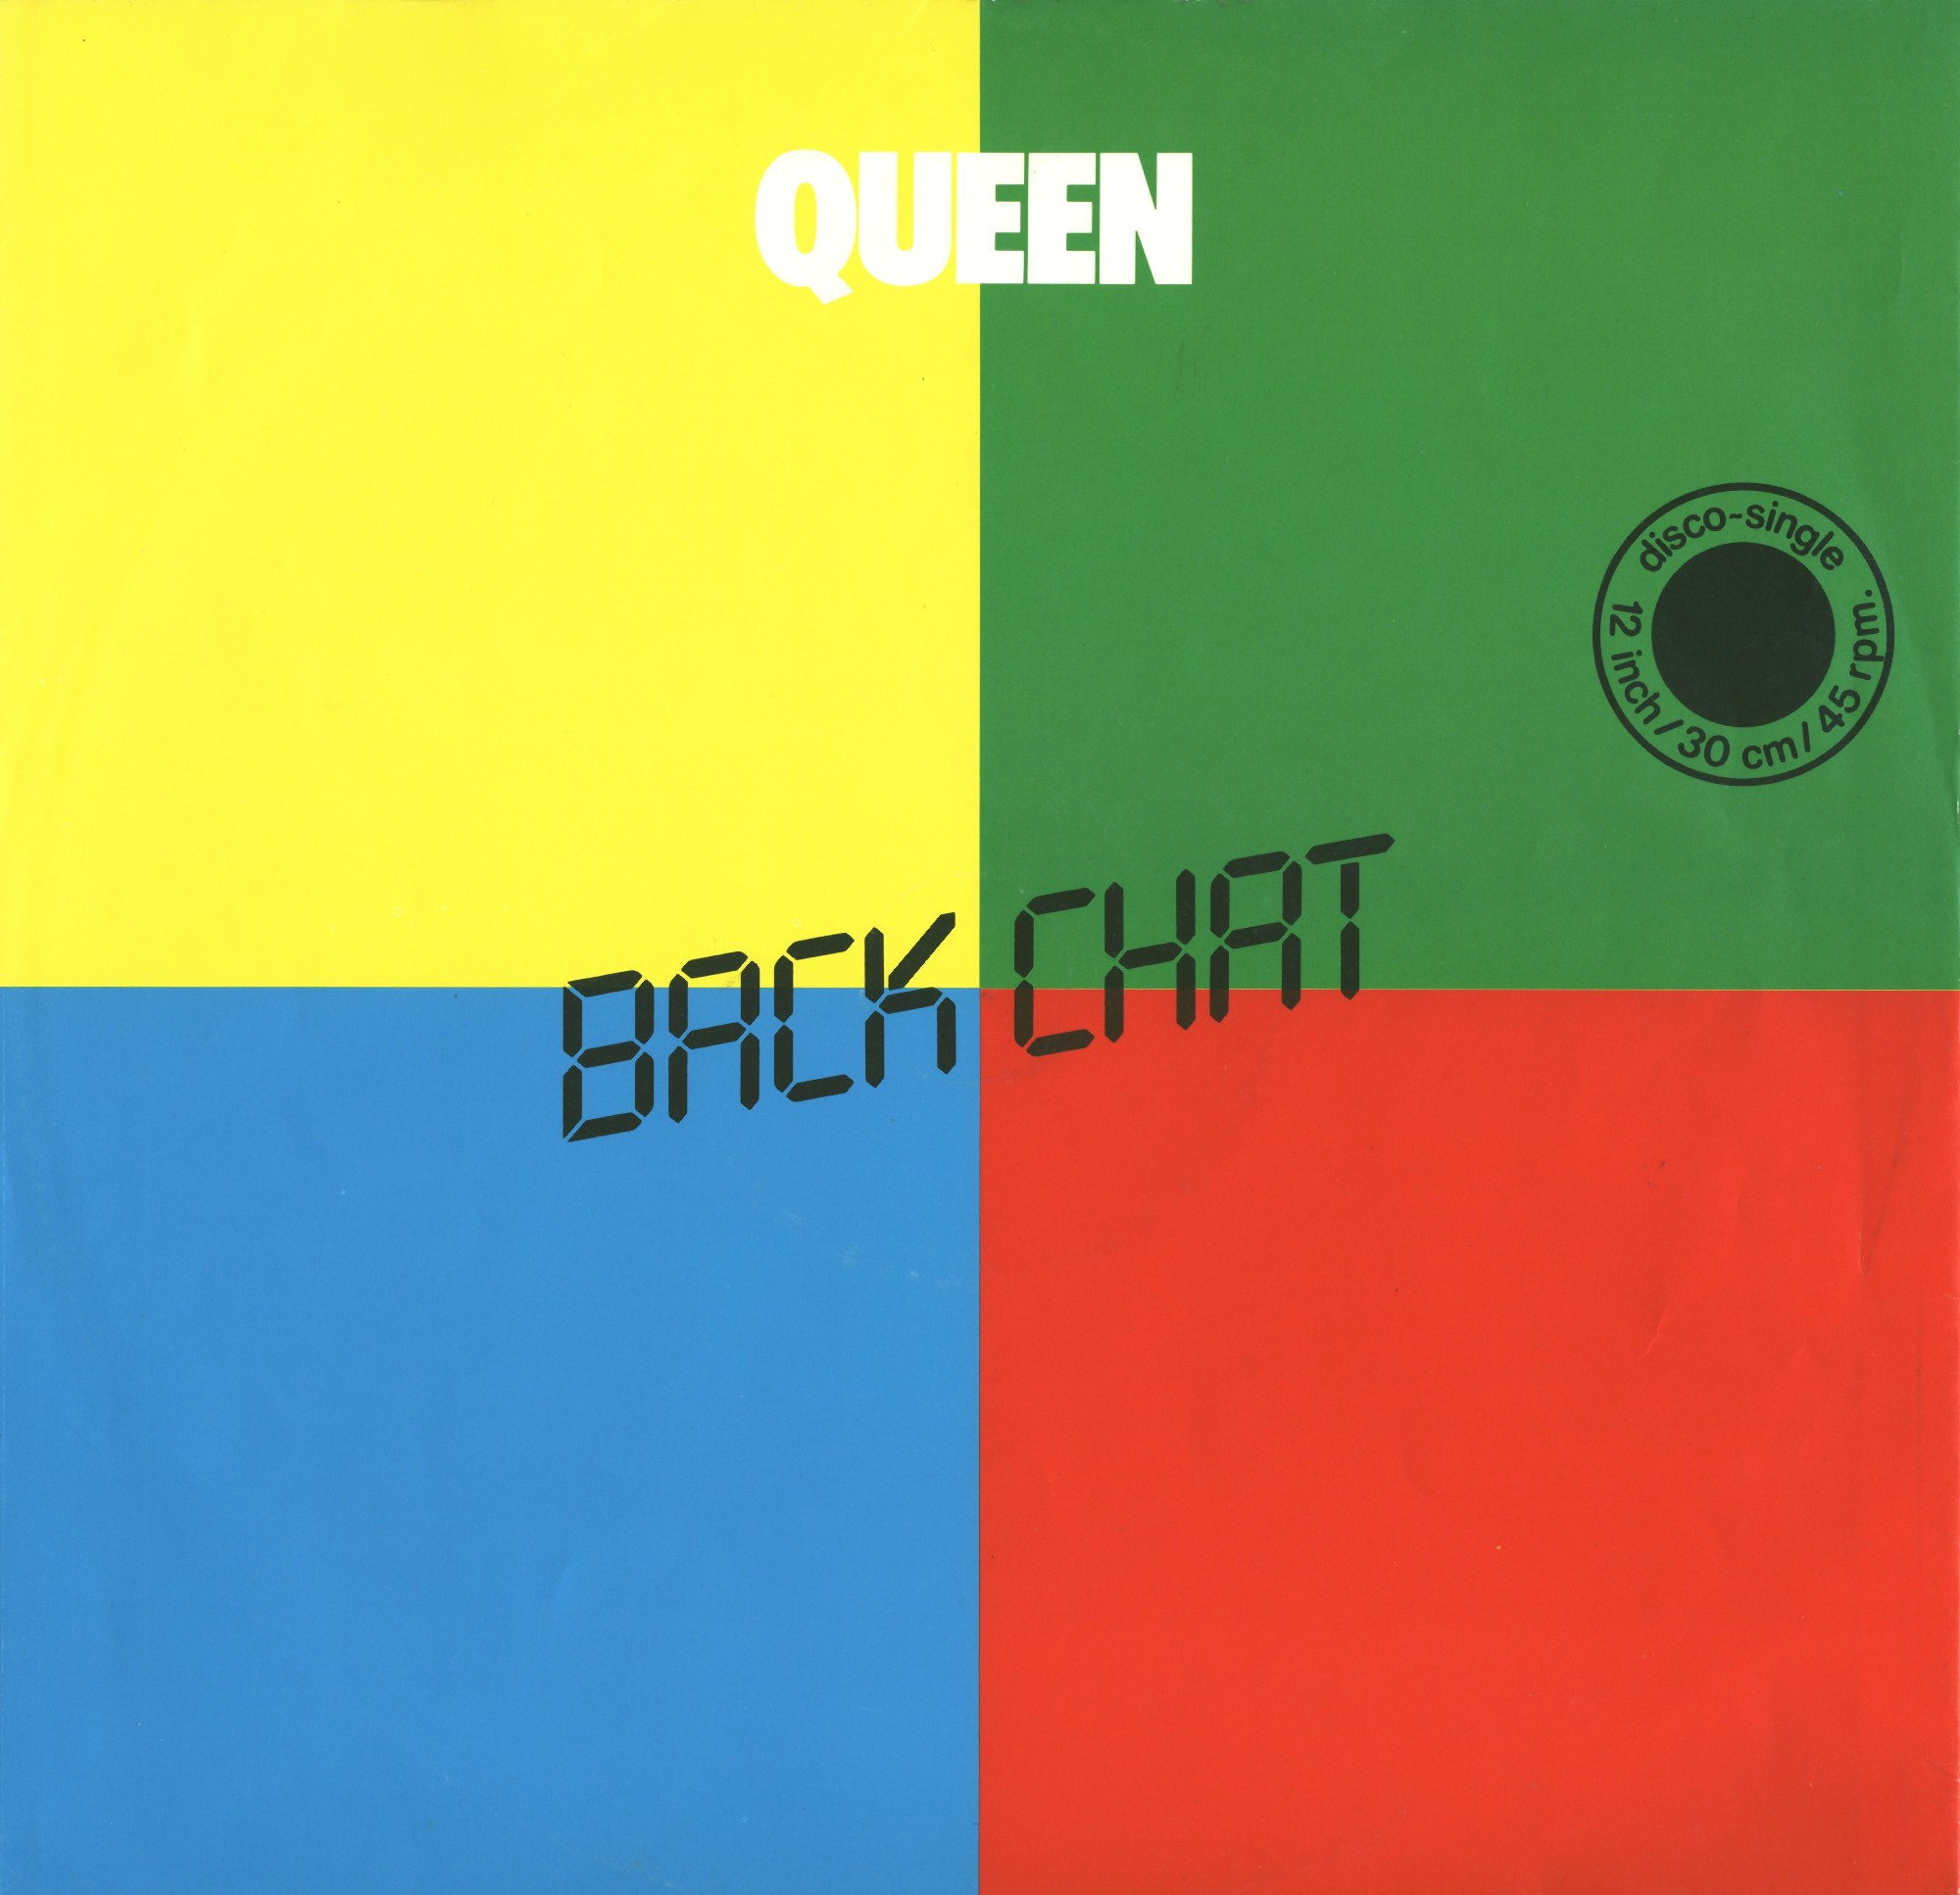 Queen back. Back to Queen обложка. Сингл «back chat» oblozhka 1982. Back chat Queen Дата выхода песни.